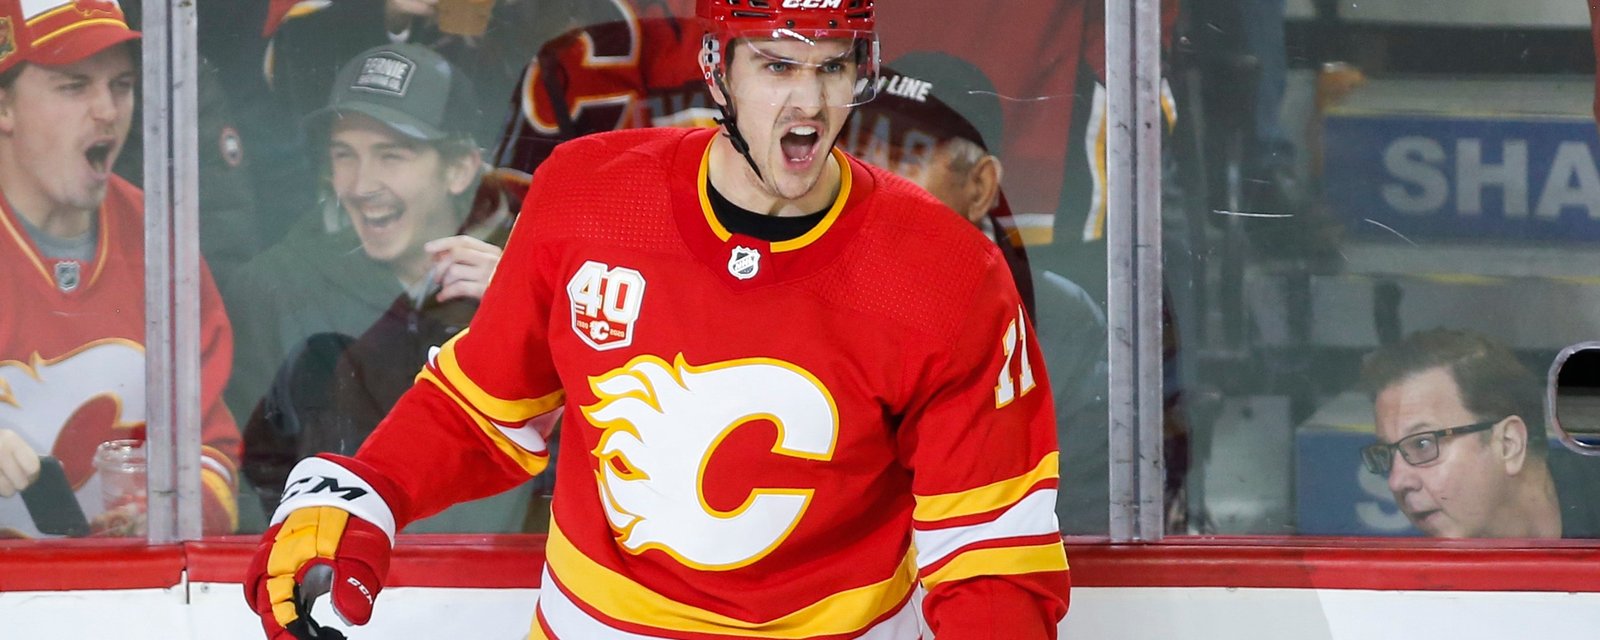 Huge promotion for Mikael Backlund right after today's announcement! 